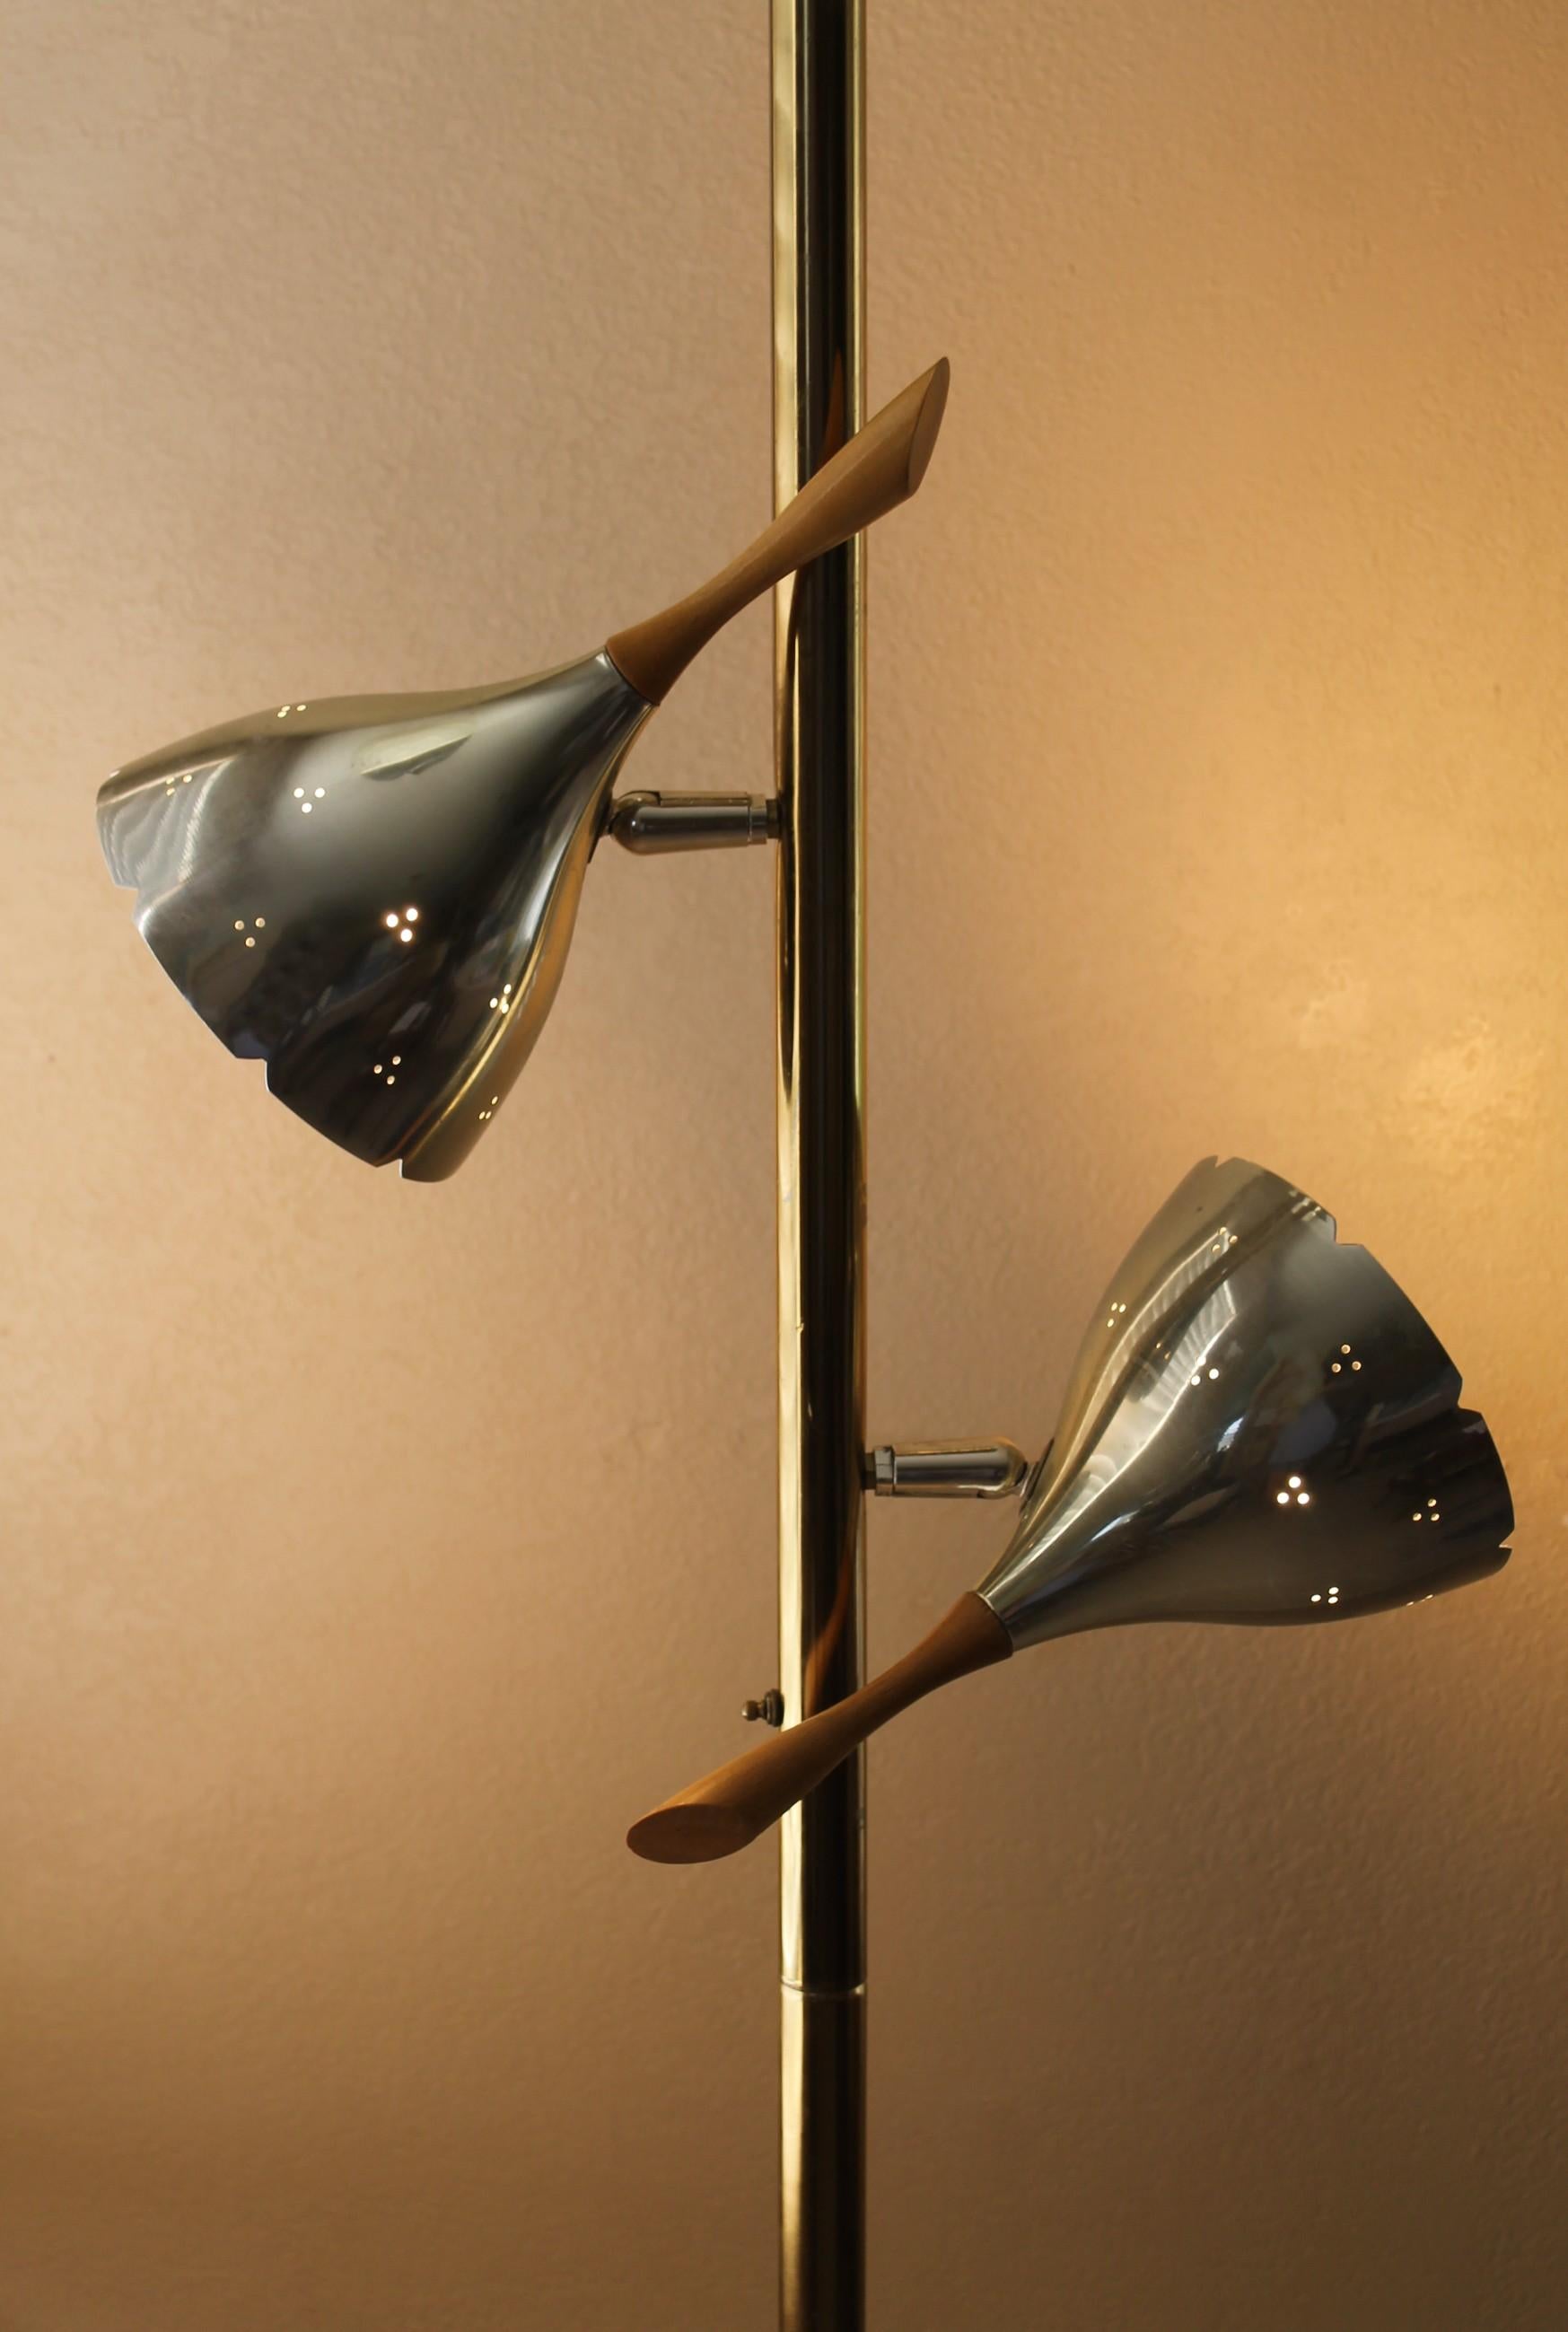 ICONIC! 


1958
MID CENTURY MODERN
TENSION POLE LAMP!
TWO 